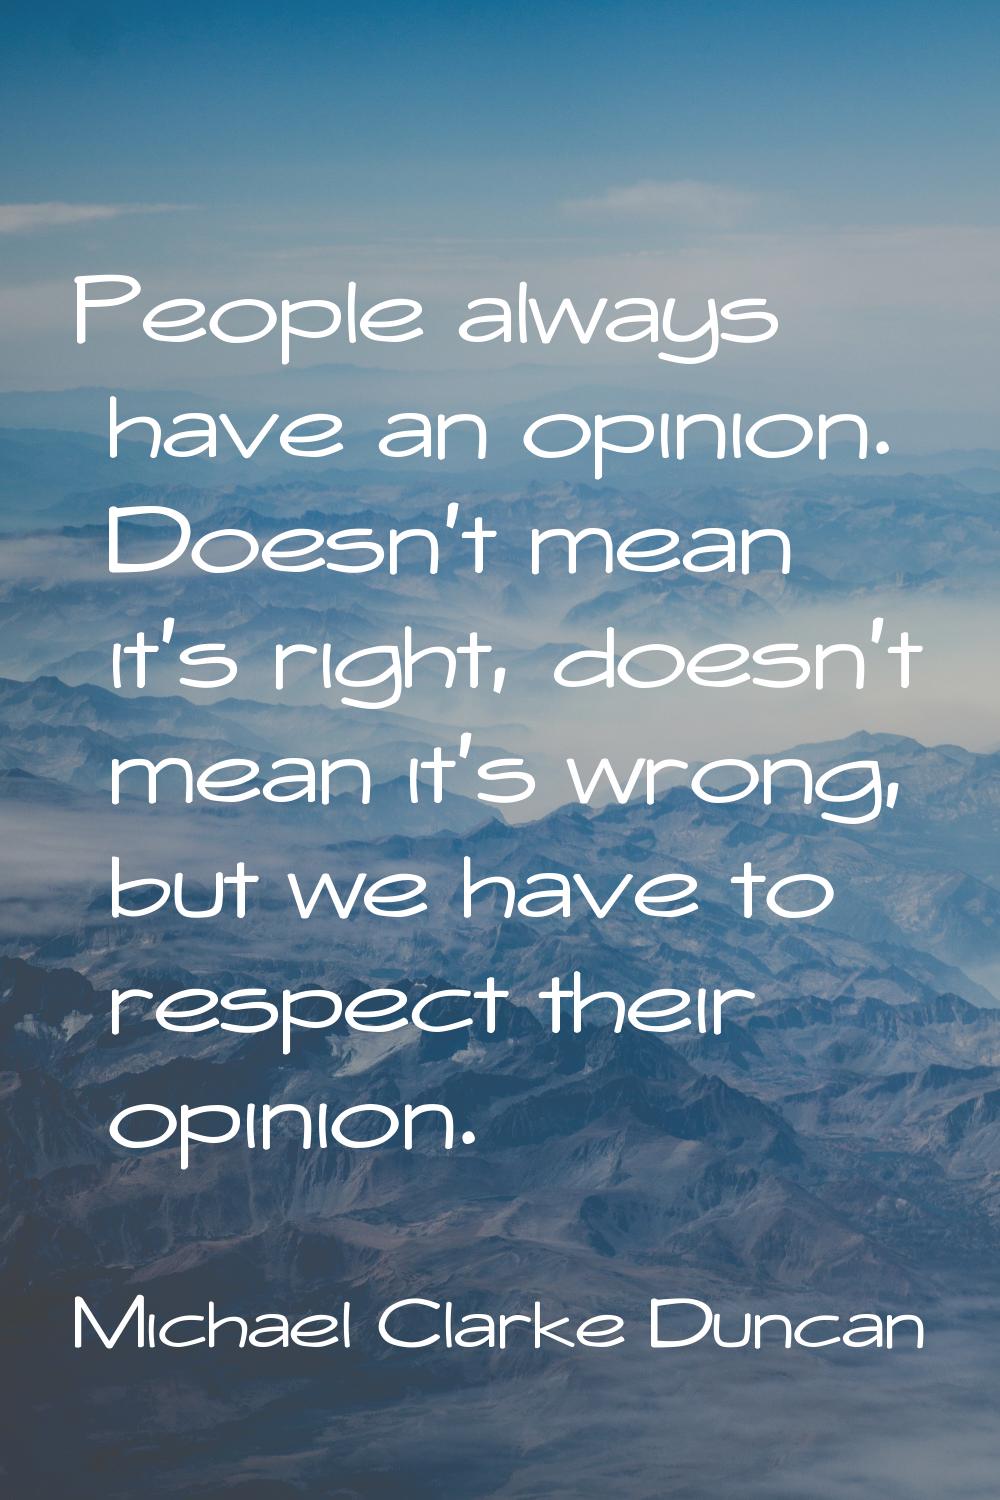 People always have an opinion. Doesn't mean it's right, doesn't mean it's wrong, but we have to res